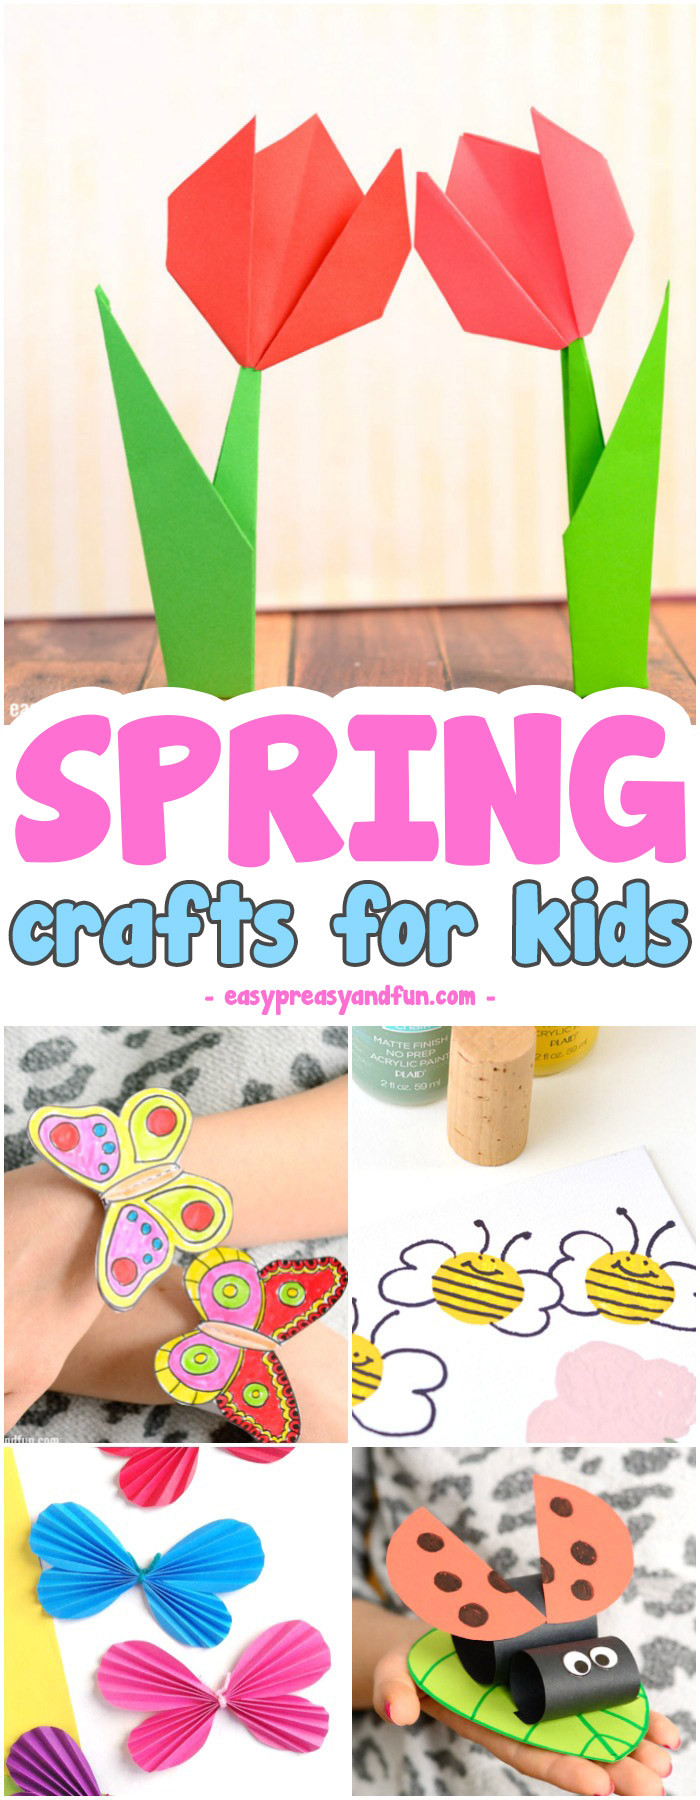 Easy Fun Crafts For Toddlers
 Spring Crafts for Kids Art and Craft Project Ideas for